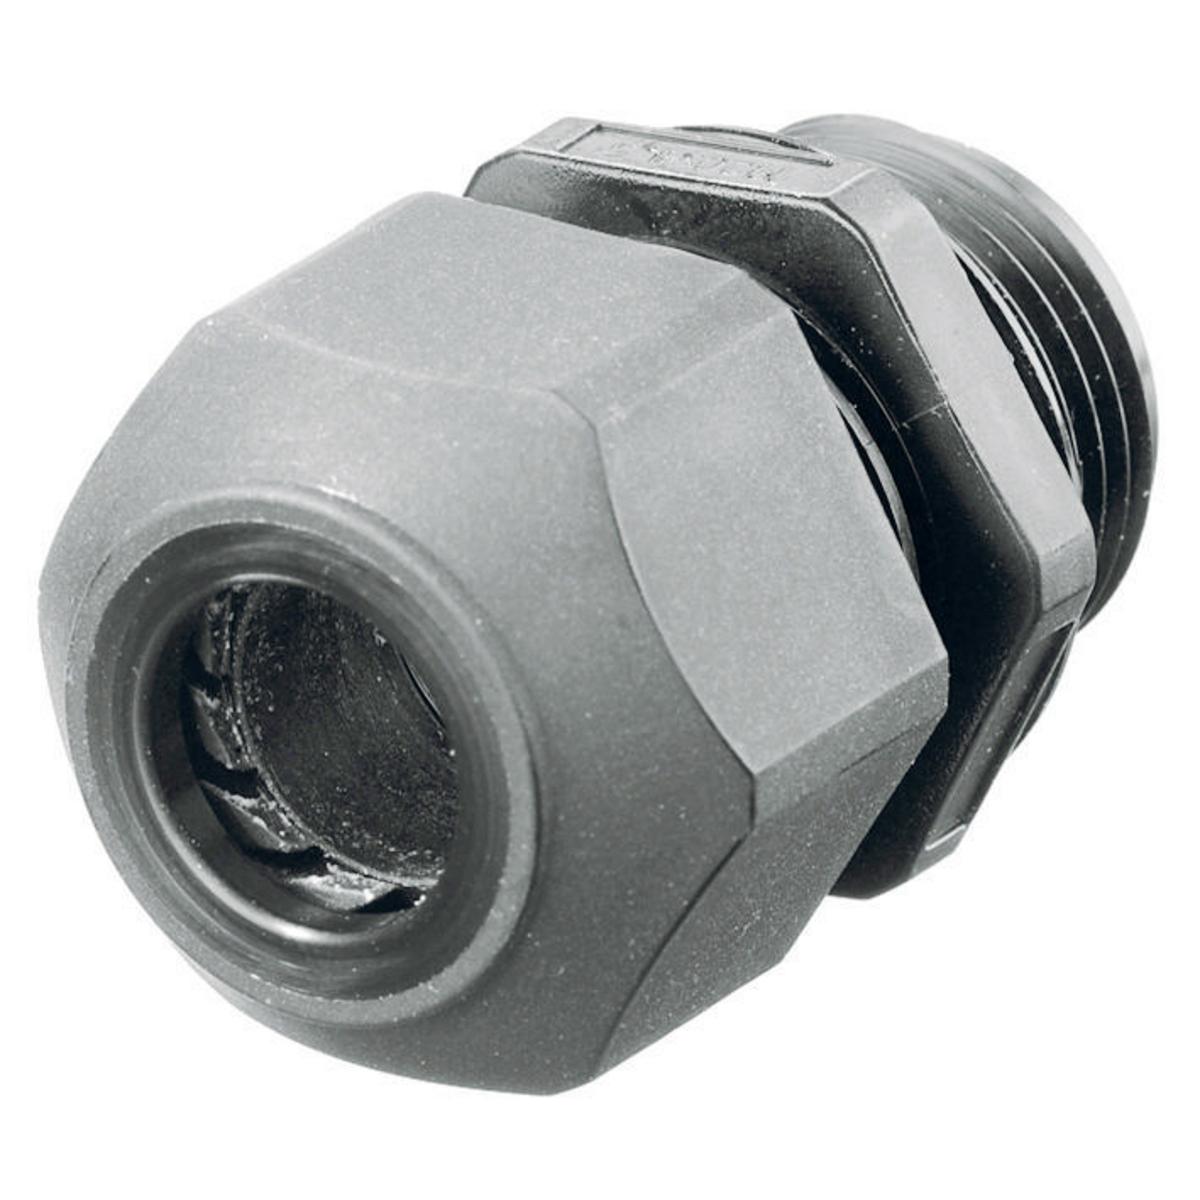 Hubbell SEC75GA Kellems Wire Management, Cord Connectors, European Style, .45-.71", 3/4", Gray  ; Low profile ; Connector body is a one-piece design with machined threads ; Standard Product